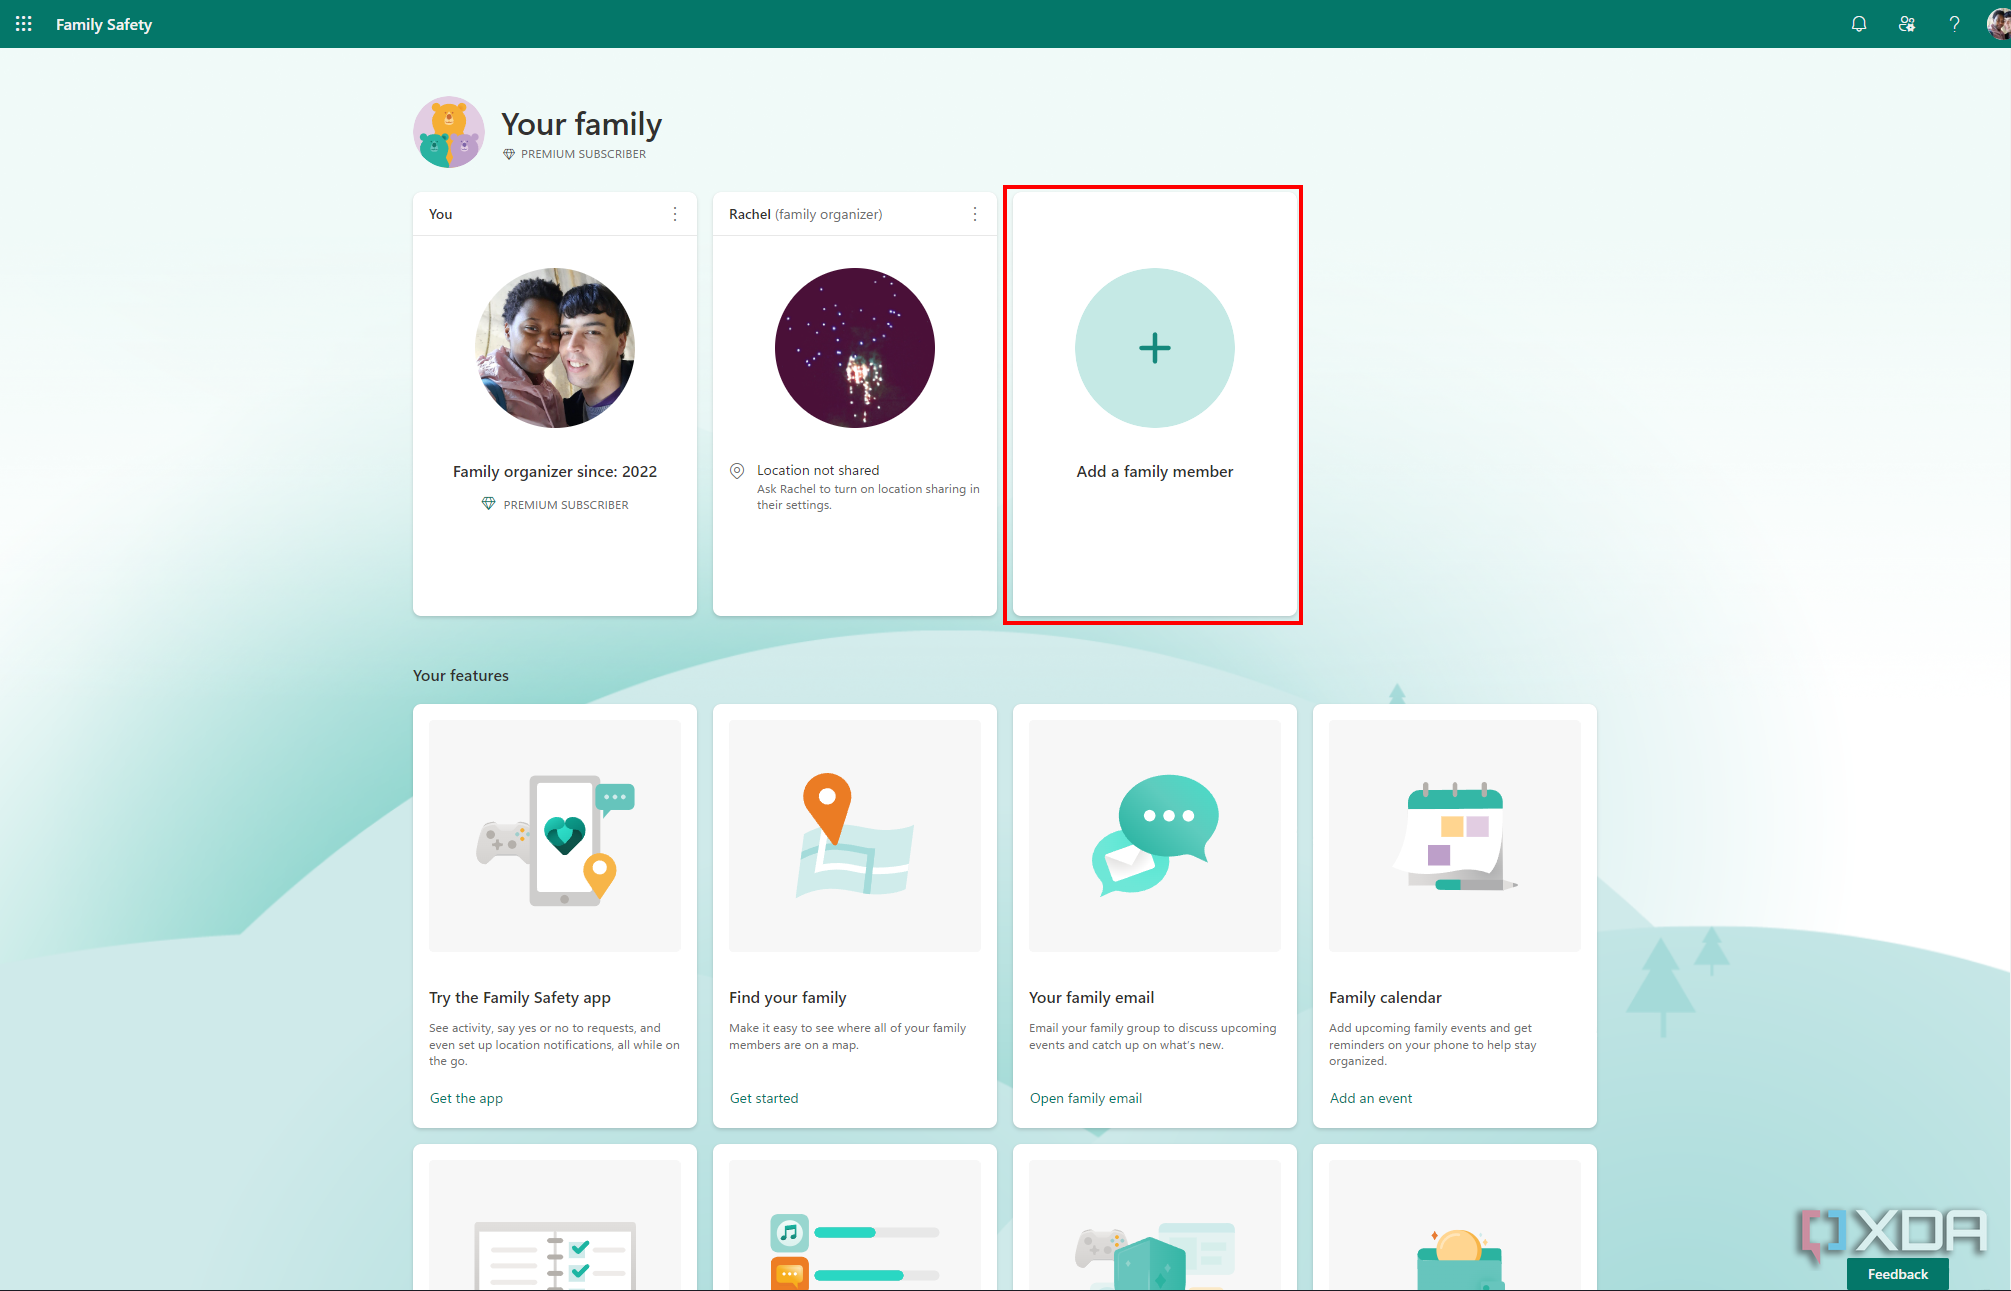 Screenshot of the Microsoft Family Safety webpage with the option to add a new family member highlighted